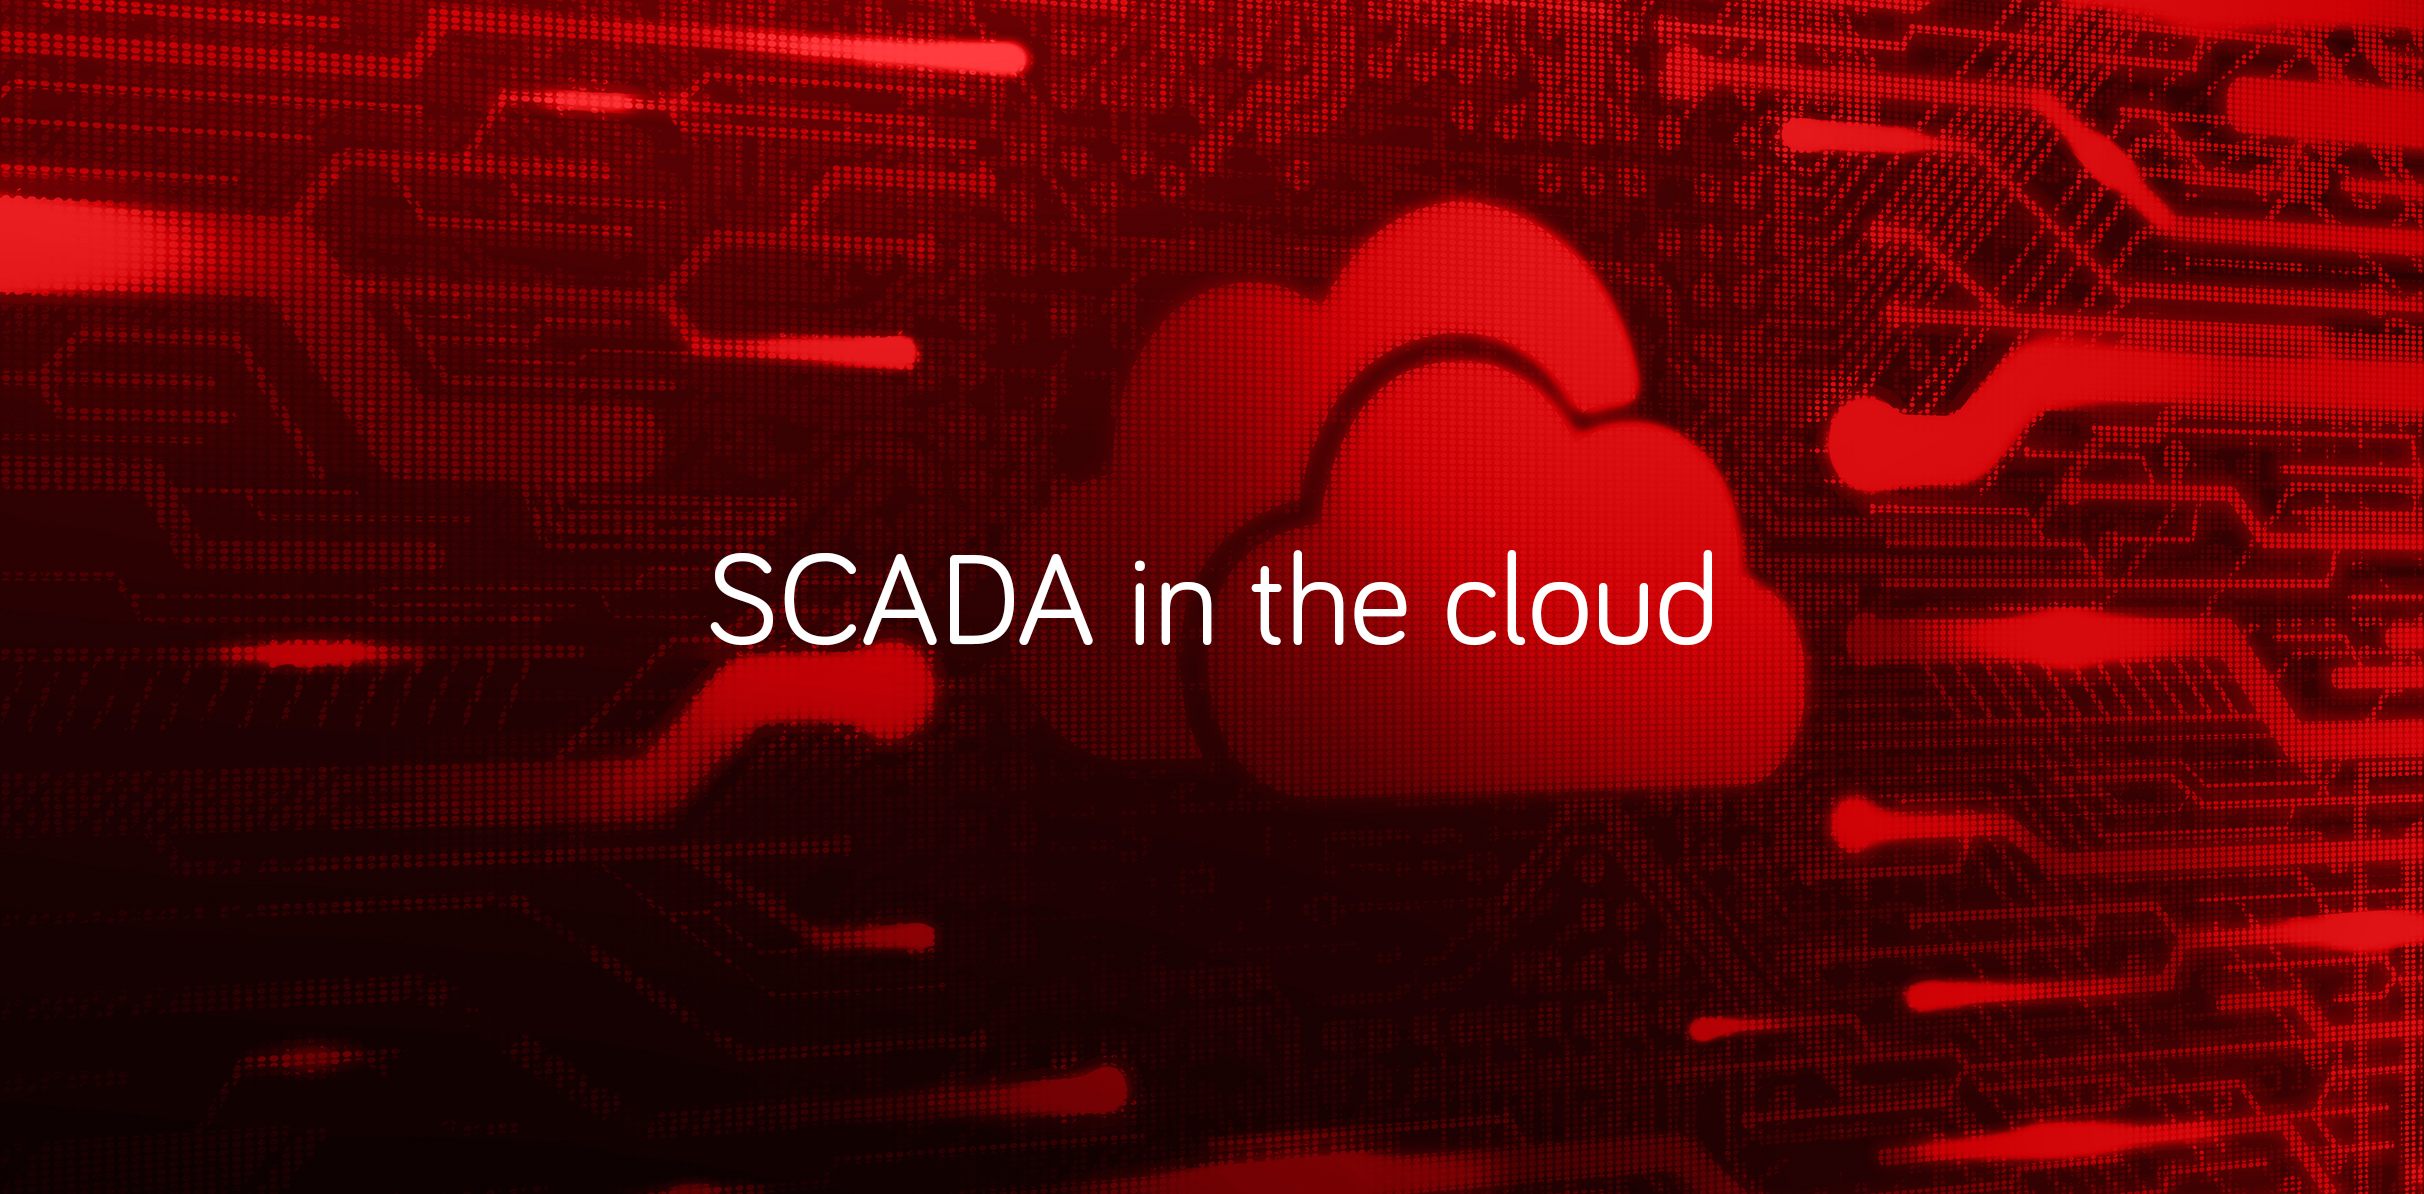 Scada in the cloud image